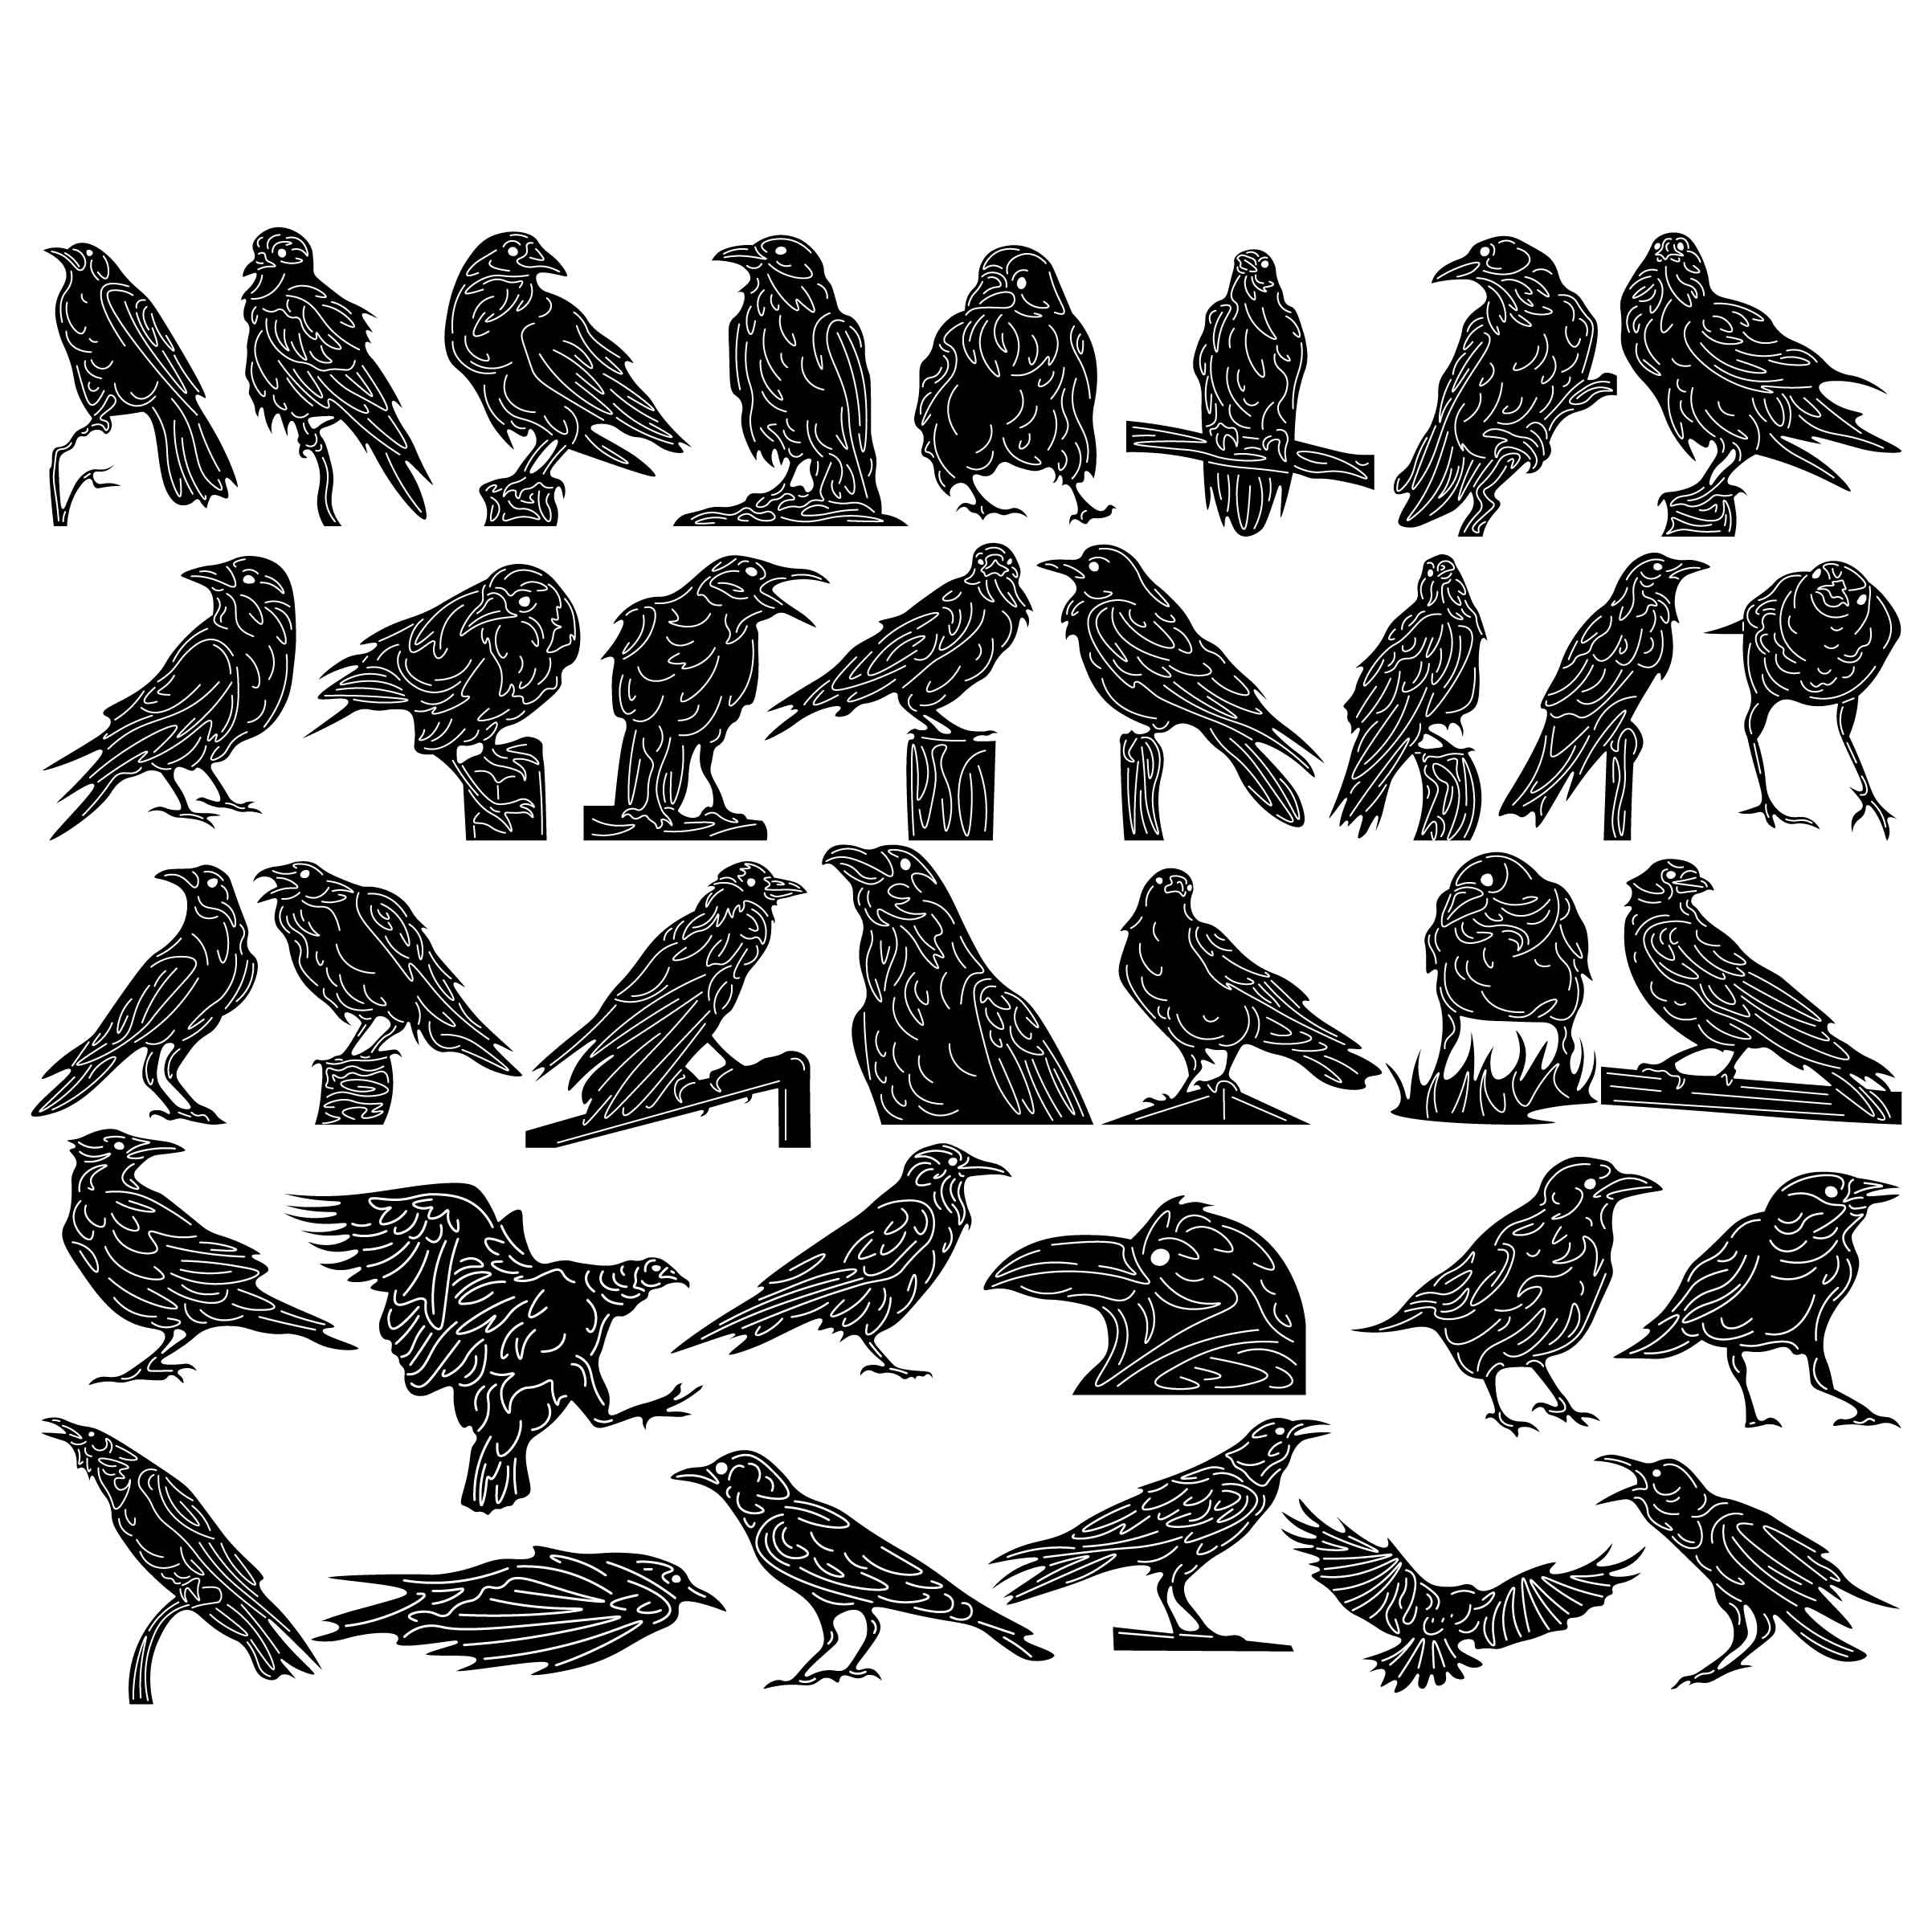 Crows and Raven Birds-DXF files Cut Ready for CNC-DXFforCNC.com